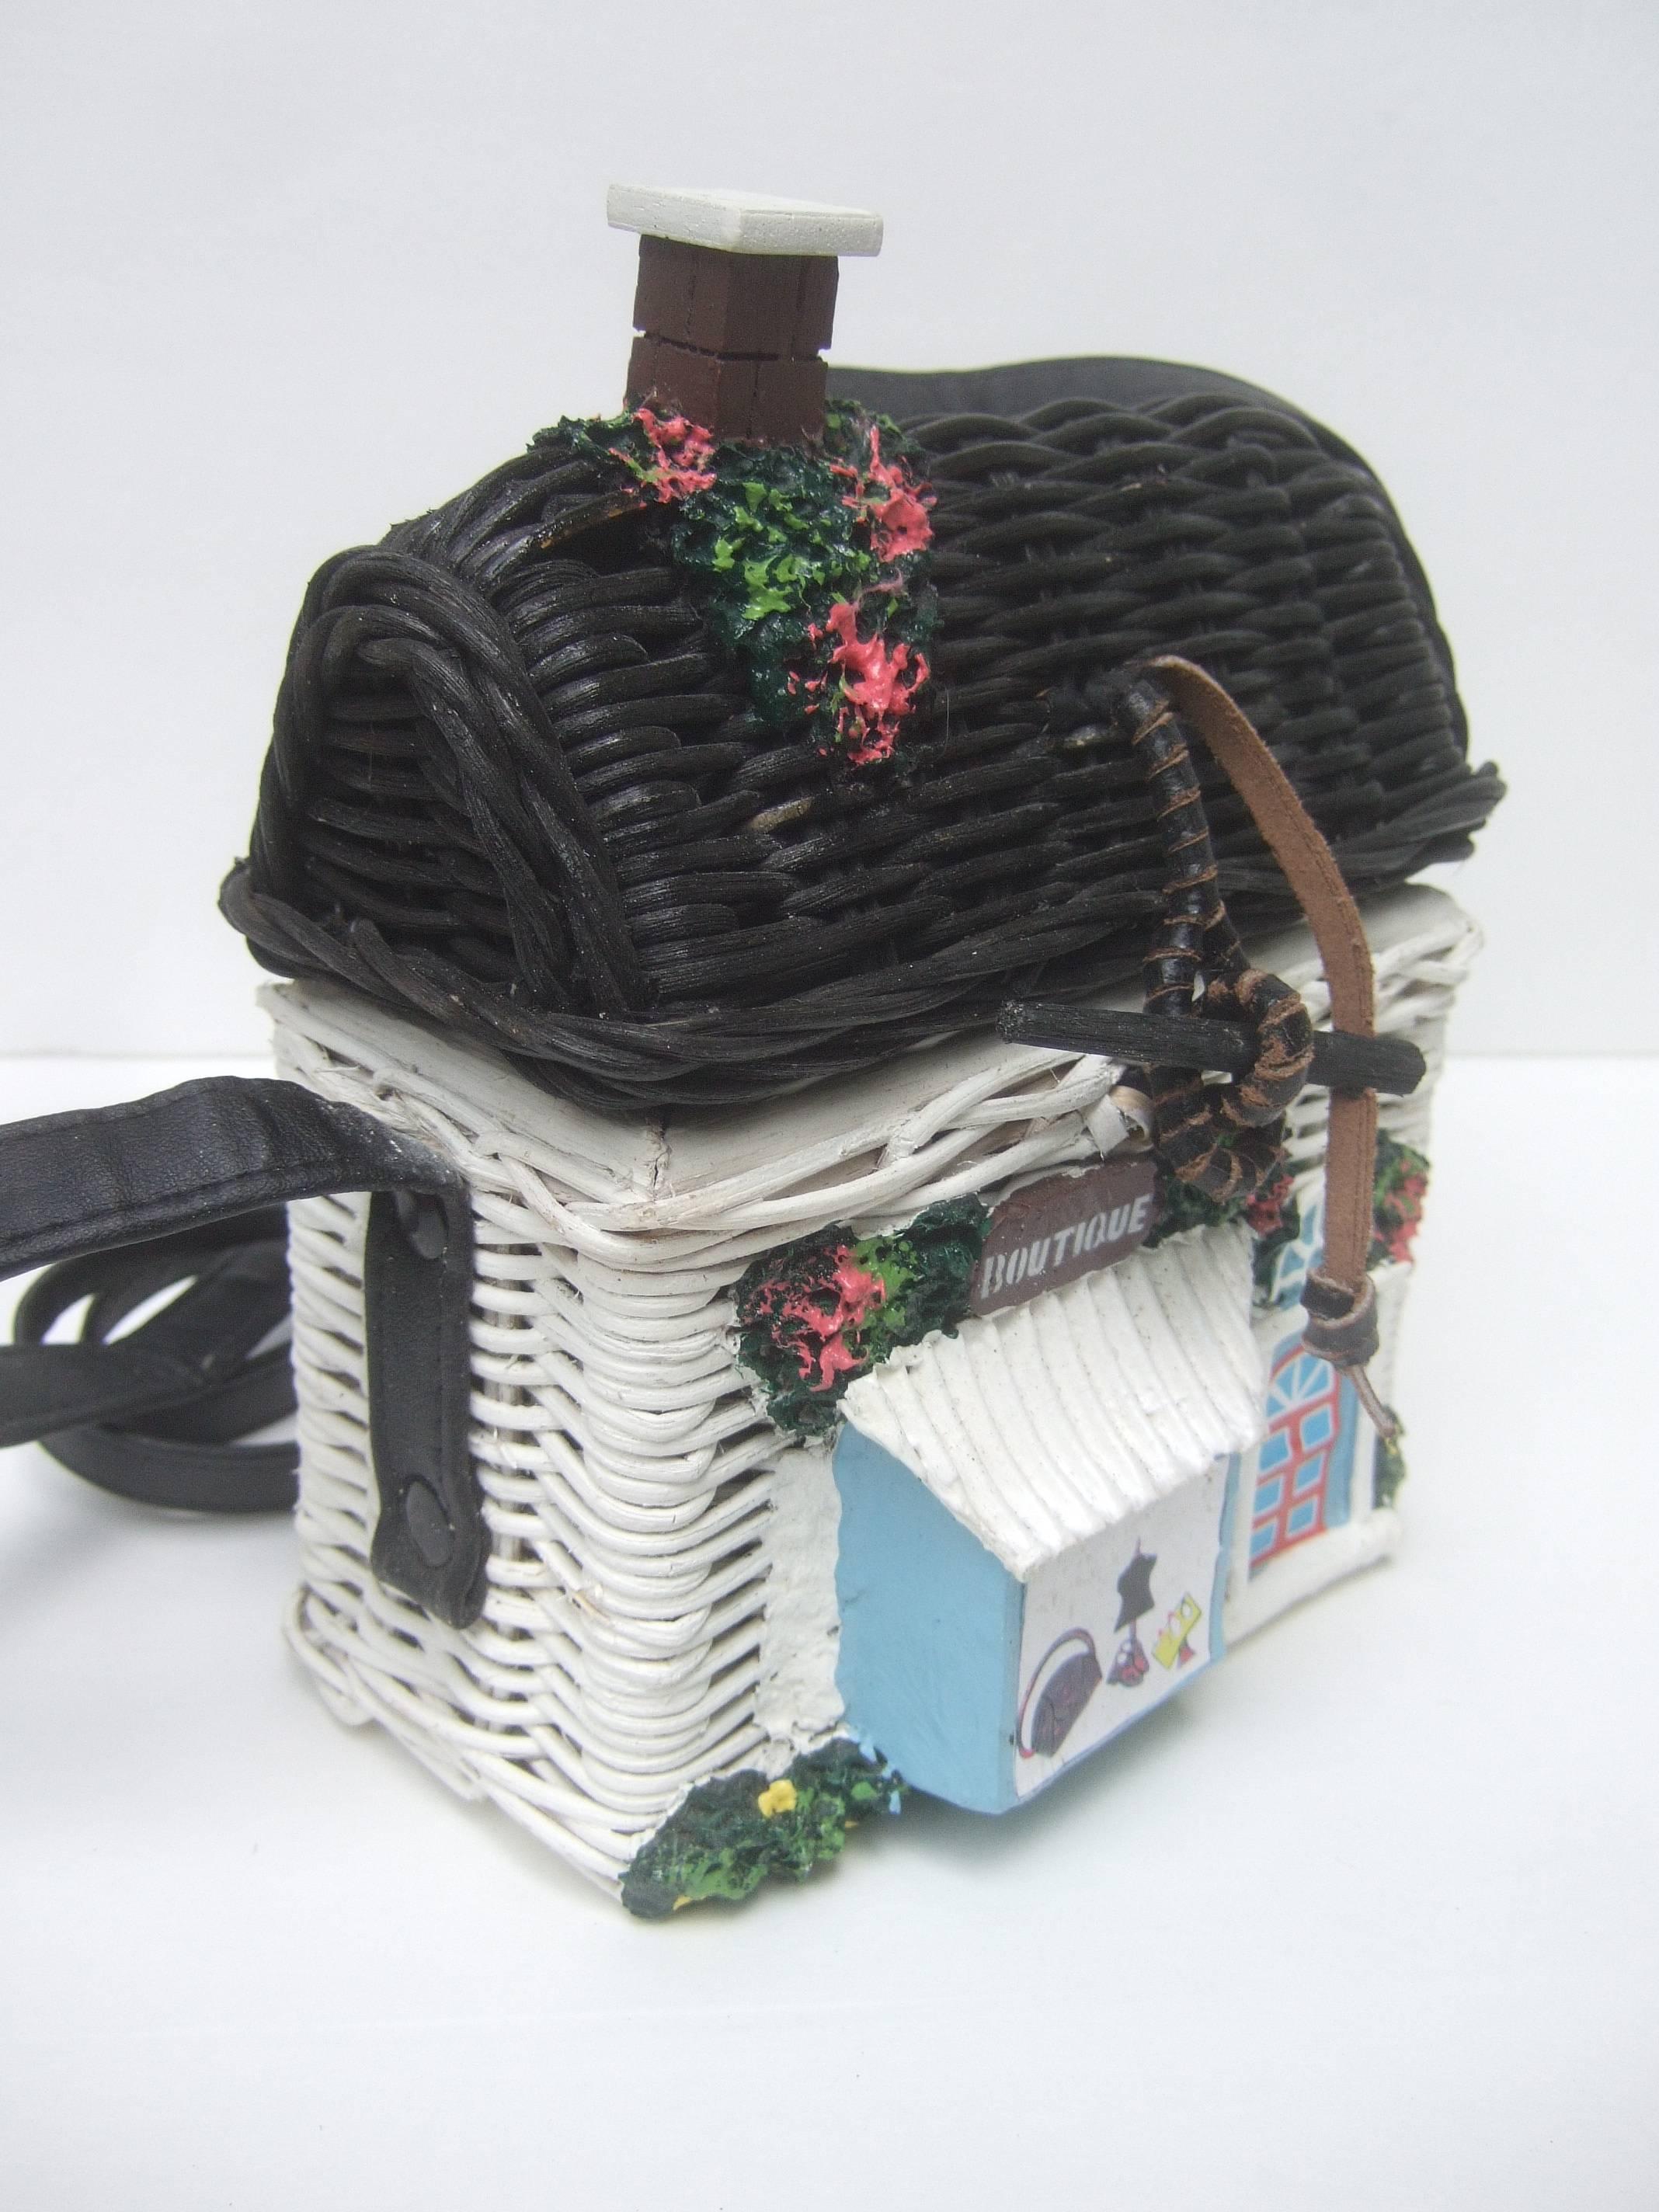 Timmy Wood's Charming wicker house shaped handbag
The whimsical wicker artisan handbag is designed as a 
women's retail clothing boutique shop

The front of the wicker house shoulder bag is designed
with a door and shop window featuring women's